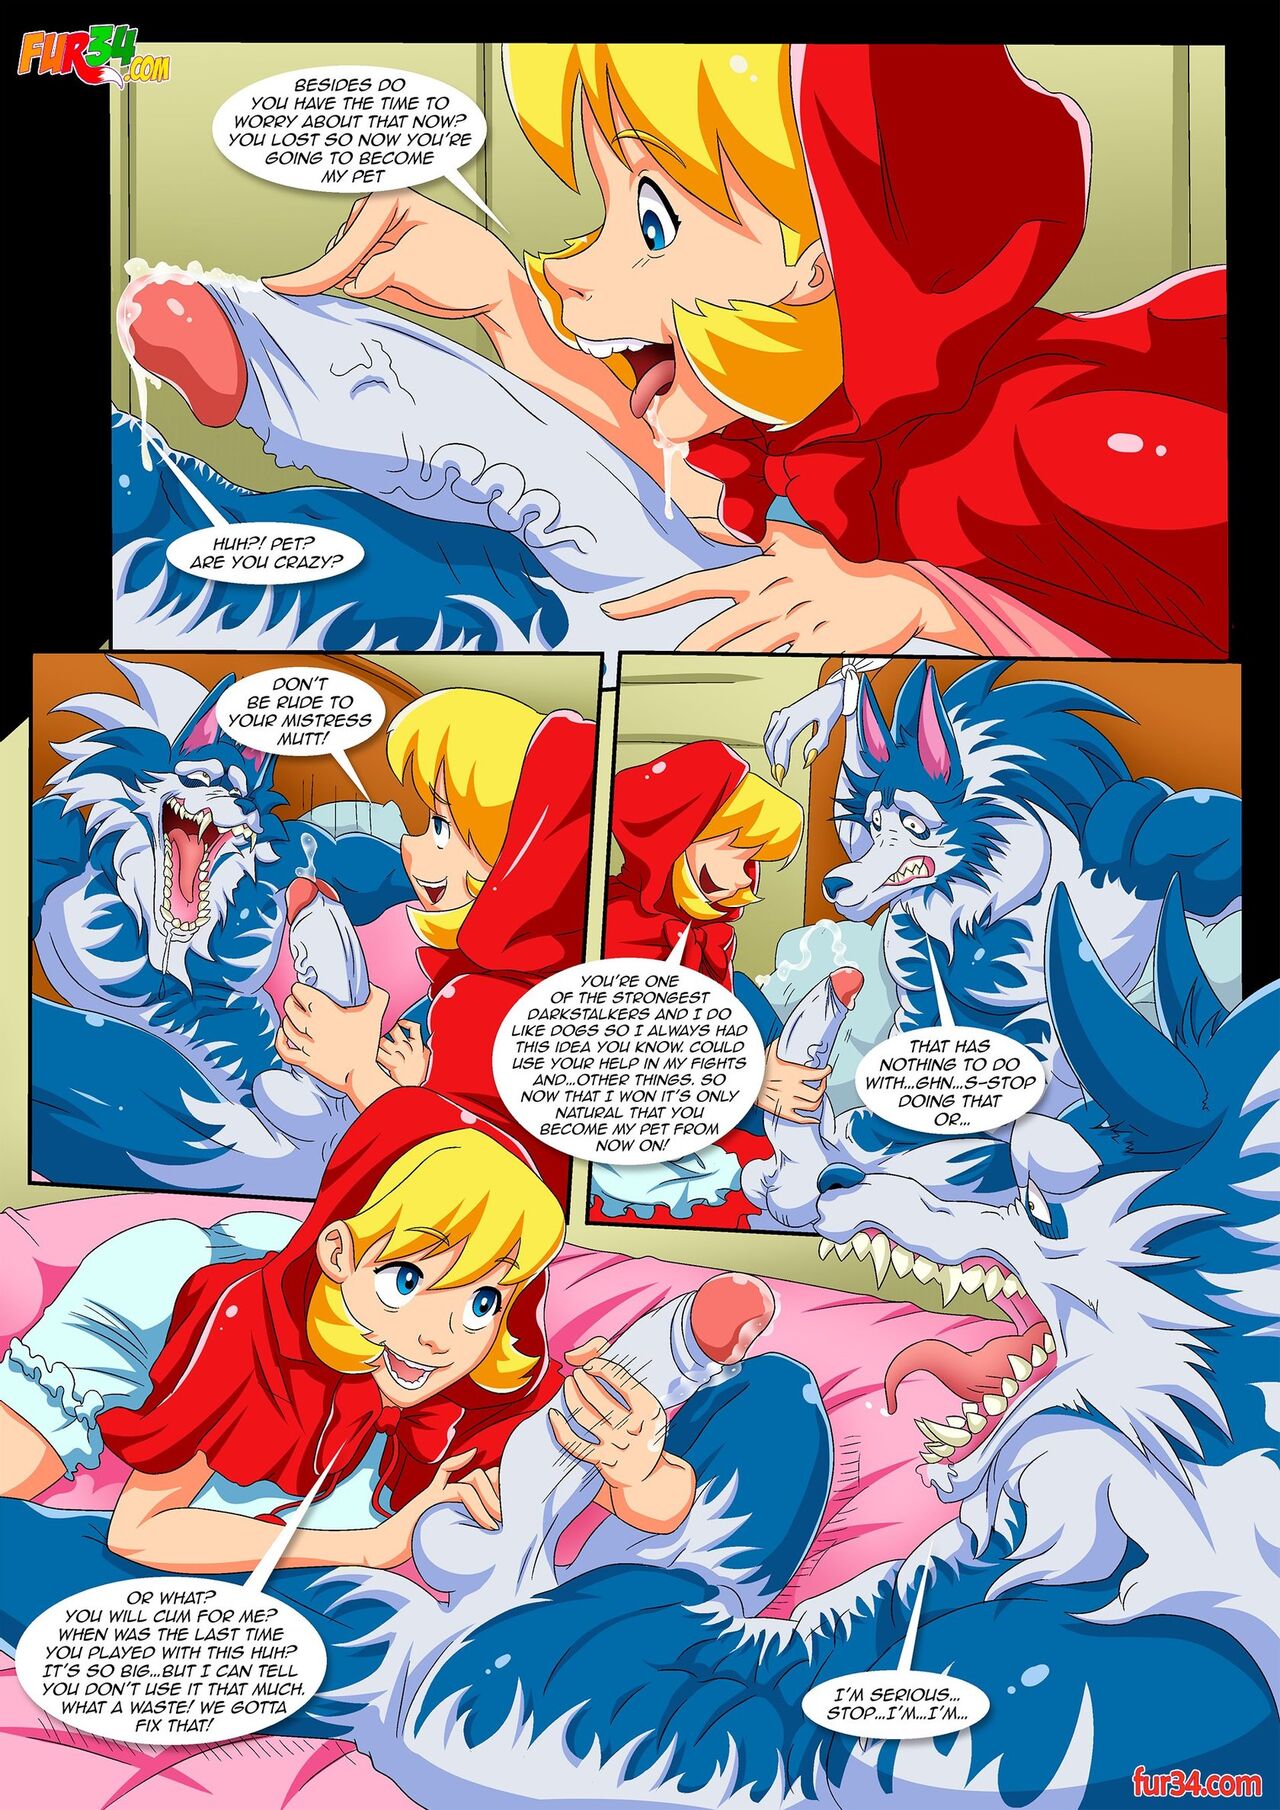 Darkstalkers Tale Of Little Red Riding Hood Palcomix 04